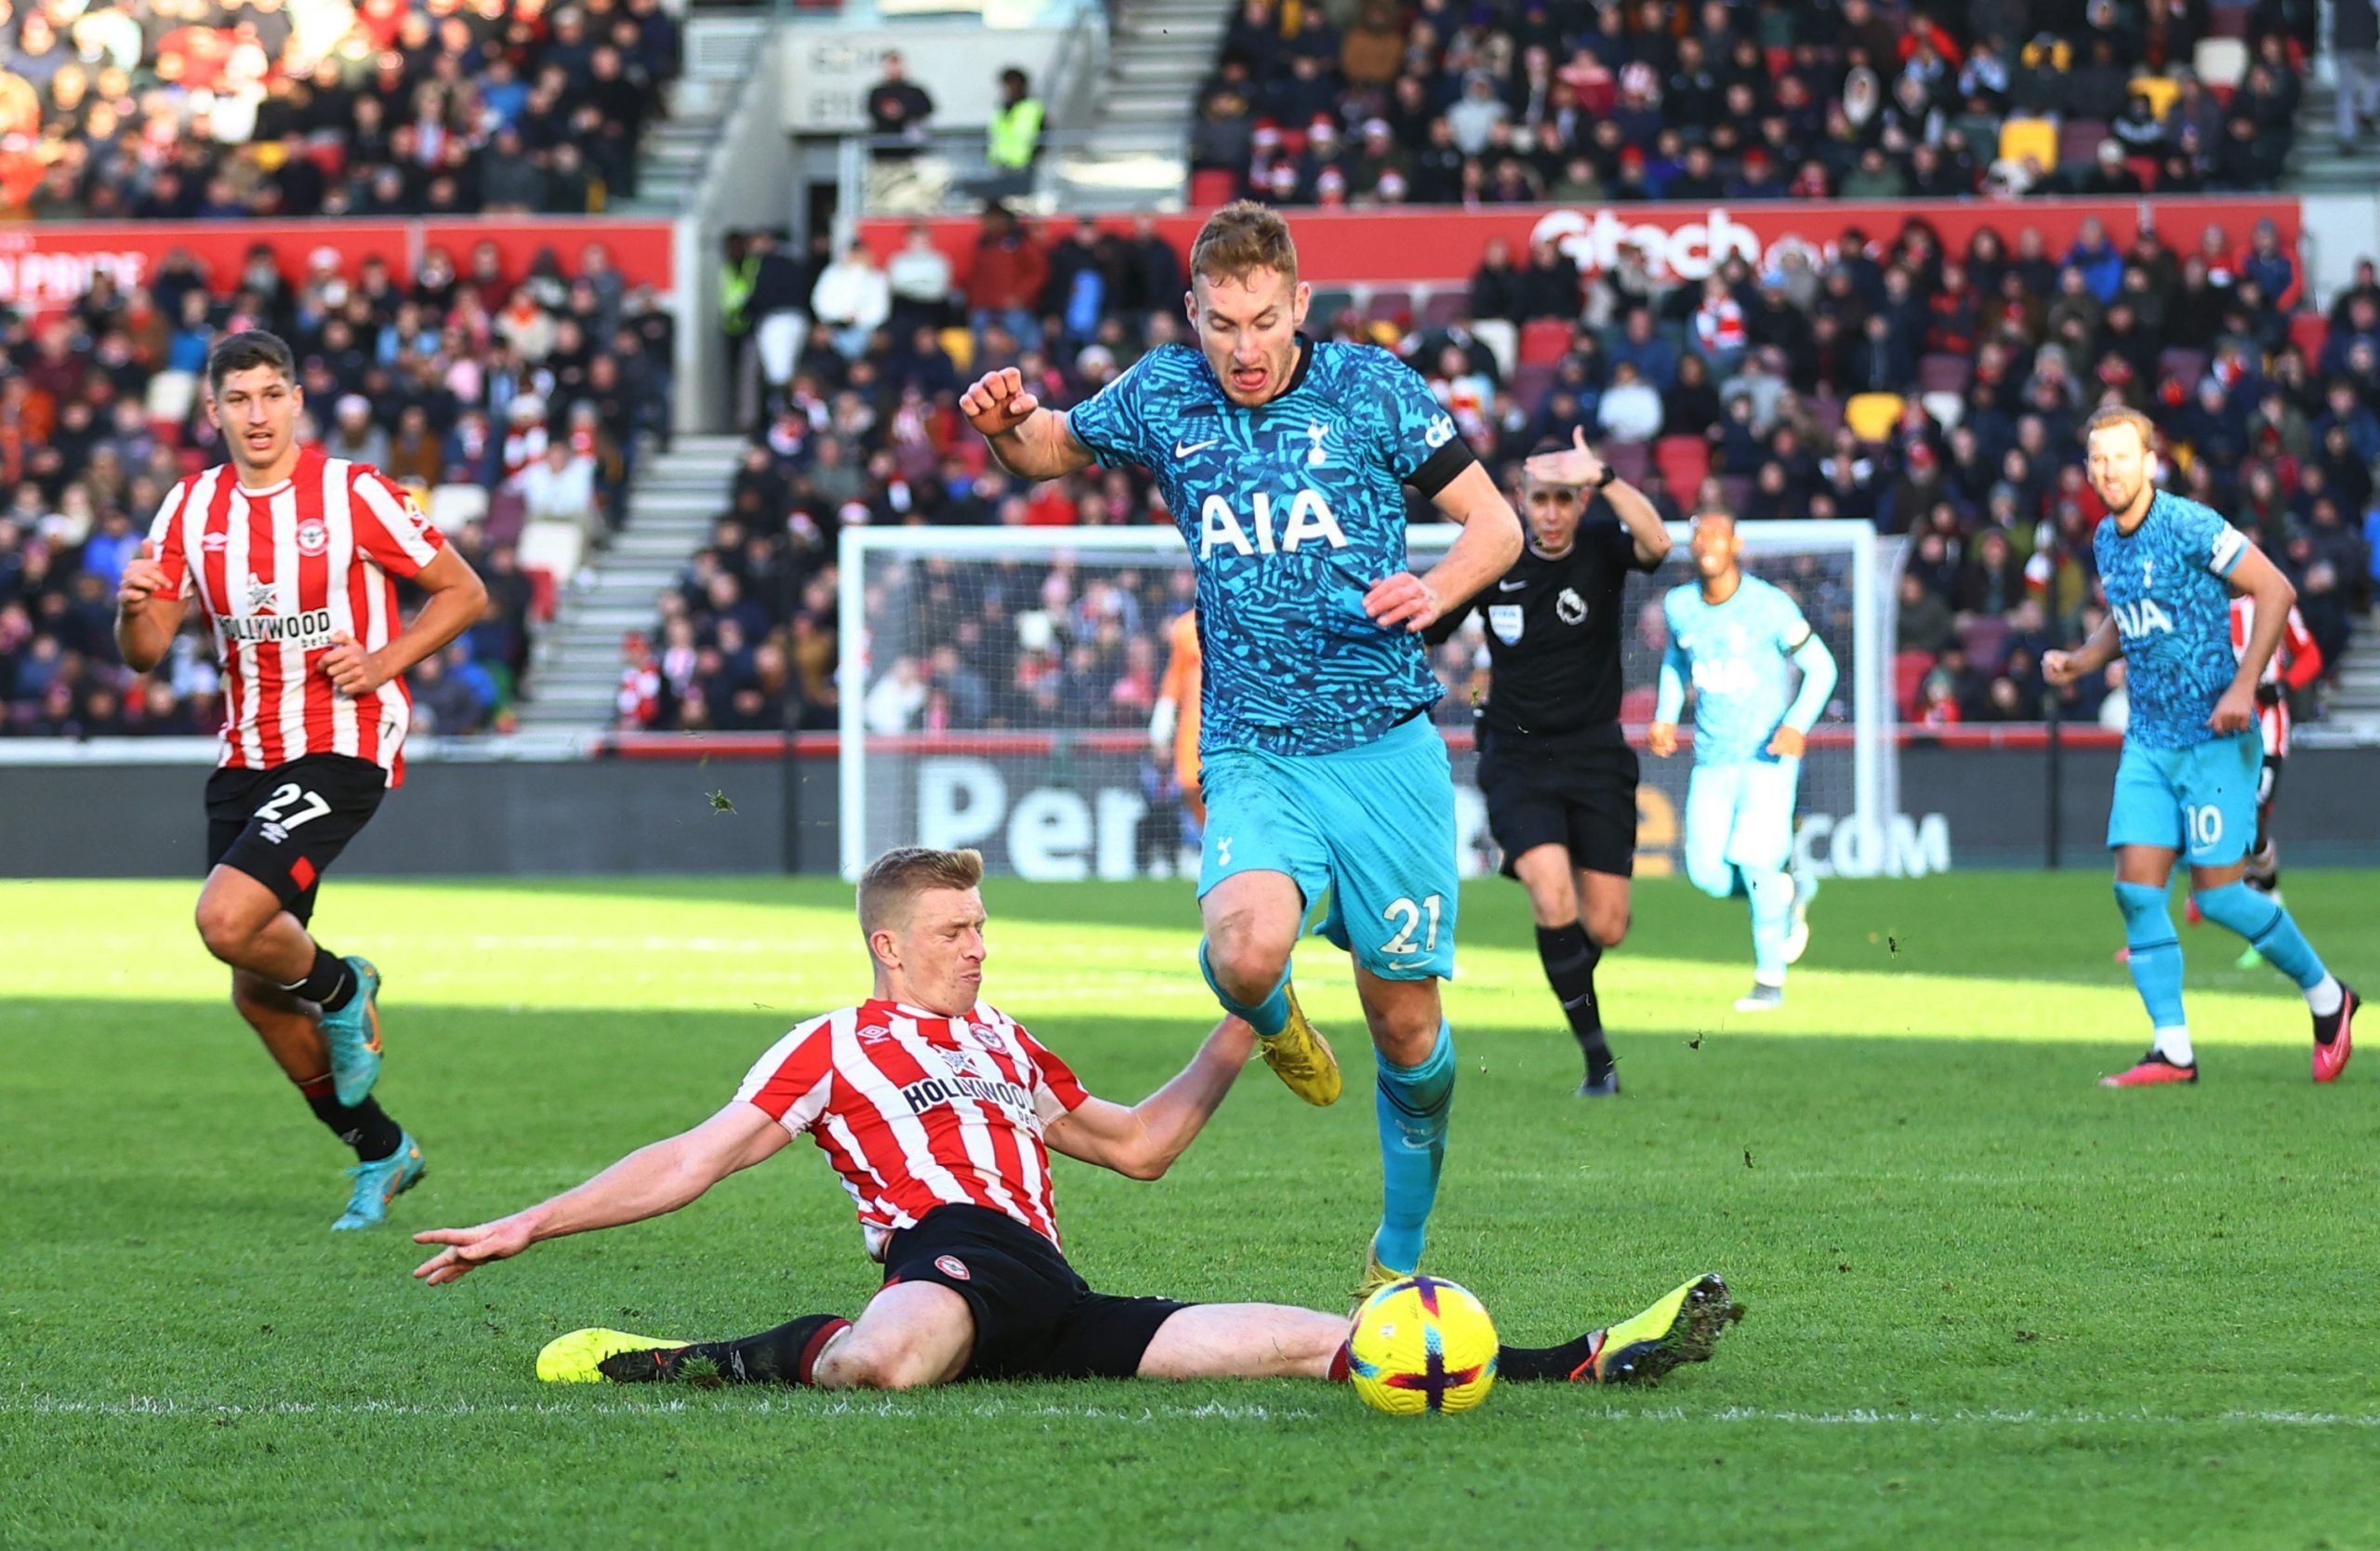 Soccer Football - Premier League - Brentford v Tottenham Hotspur - Brentford Community Stadium, London, Britain - December 26, 2022 Brentford's Ben Mee in action with Tottenham Hotspur's Dejan Kulusevski Action Images via Reuters/Matthew Childs EDITORIAL USE ONLY. No use with unauthorized audio, video, data, fixture lists, club/league logos or 'live' services. Online in-match use limited to 75 images, no video emulation. No use in betting, games or single club /league/player publications.  Pleas